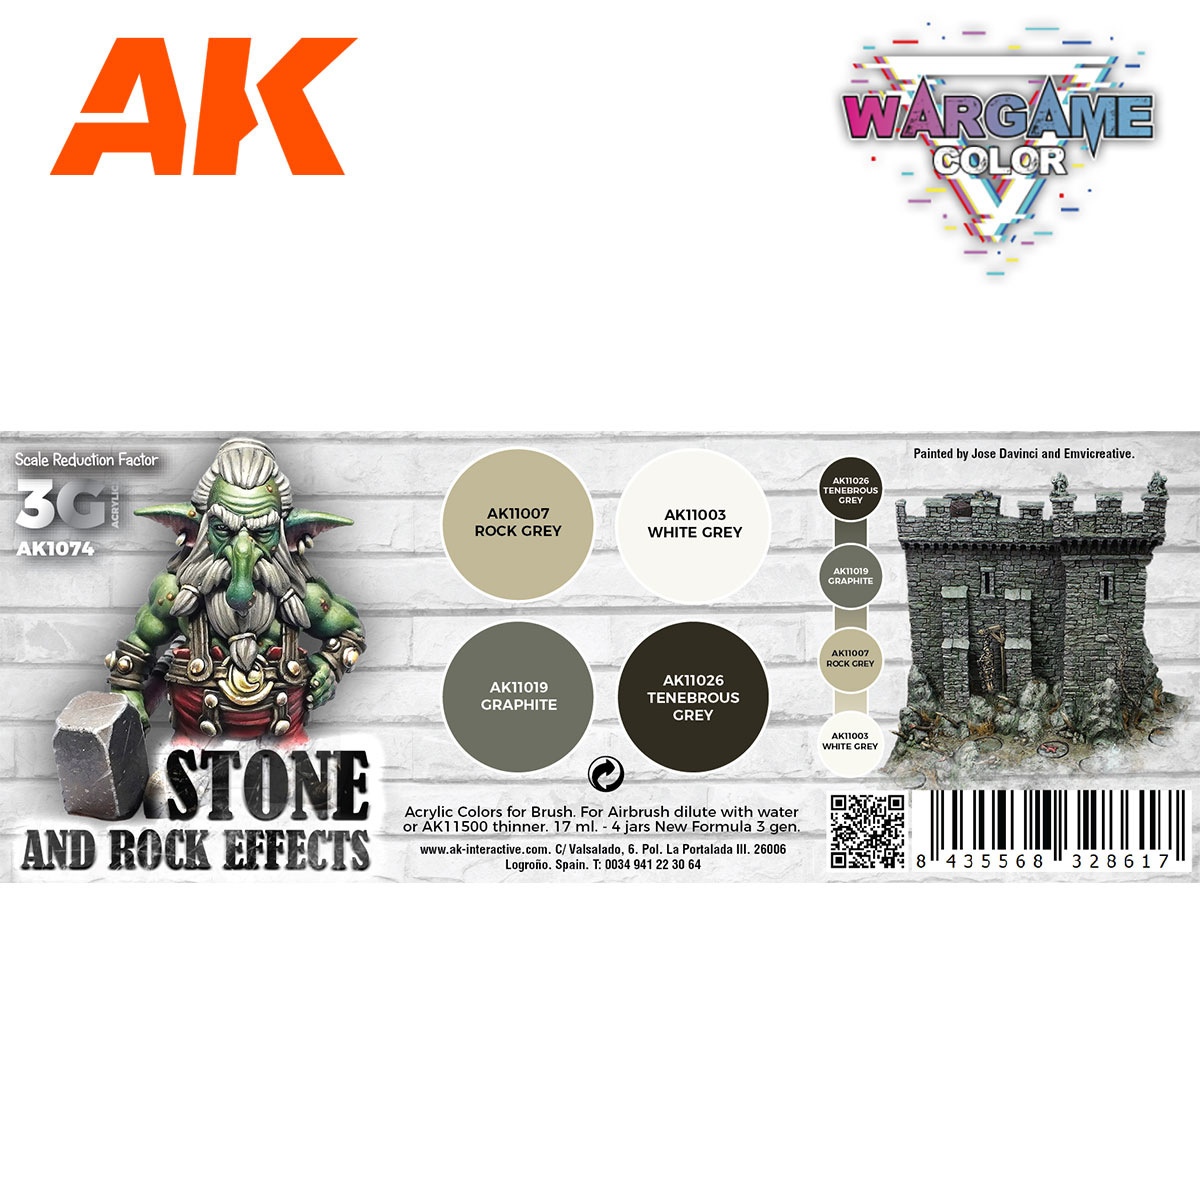 Buy WARGAME COLOR SET. STONE AND ROCK EFFECTS. online for11,00€